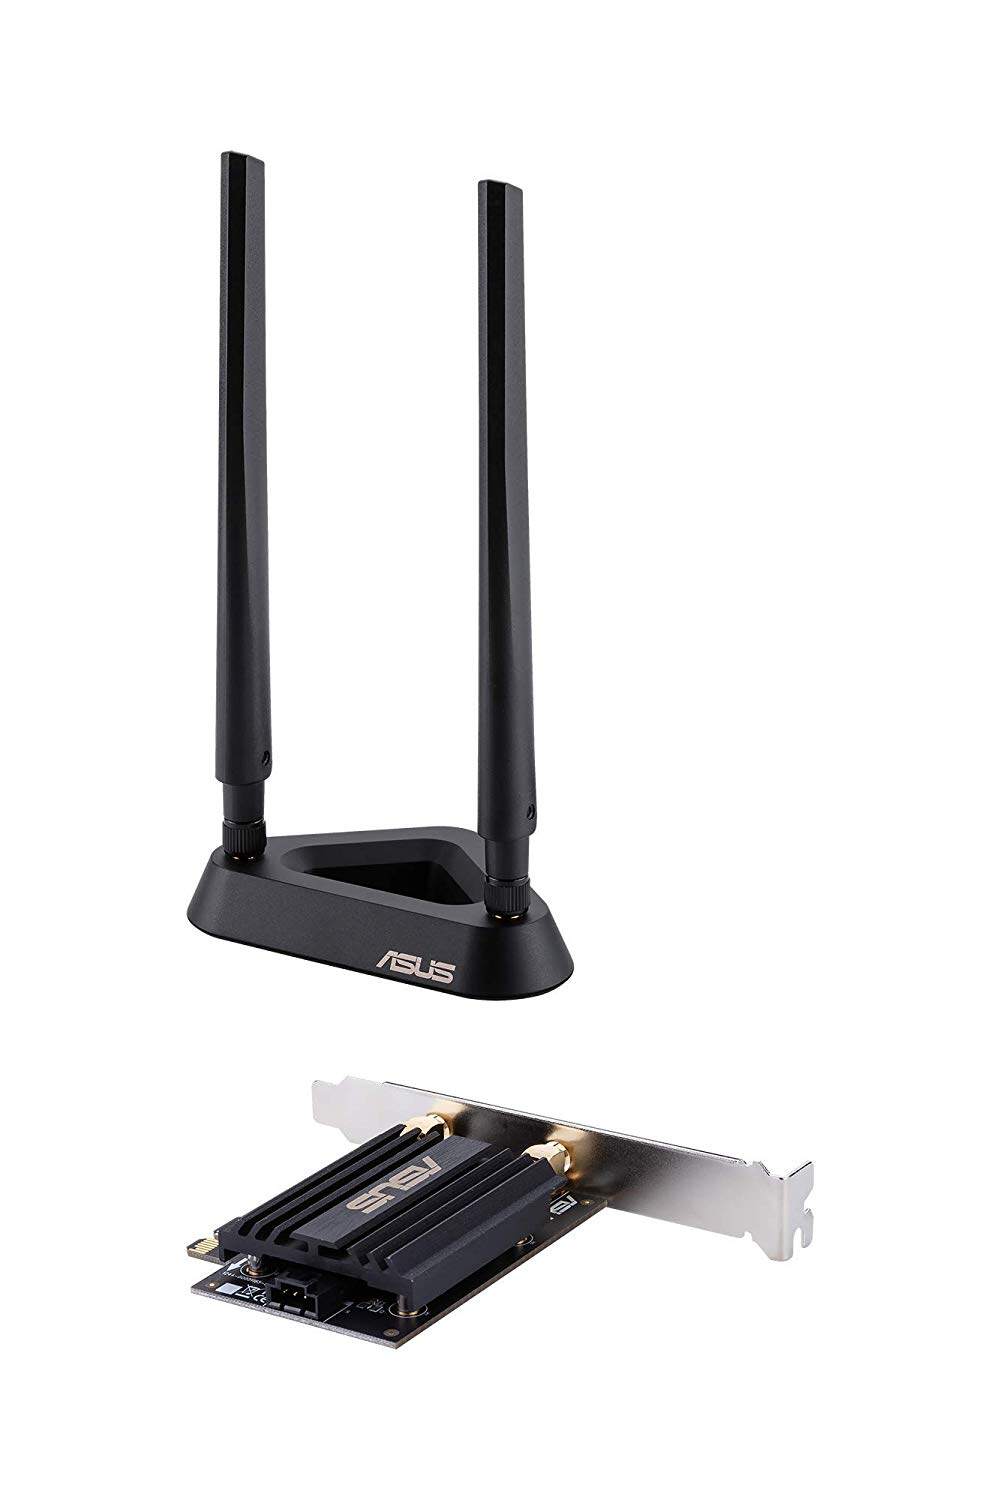 Asus AX3000 Dual Band PCI-E WiFi 6 (802.11ax) Adapter (PCE-AX58BT), 2 external antennas. Supporting 160MHz, Bluetooth 5.0, WPA3 network security, OFDMA, MU-MIMO